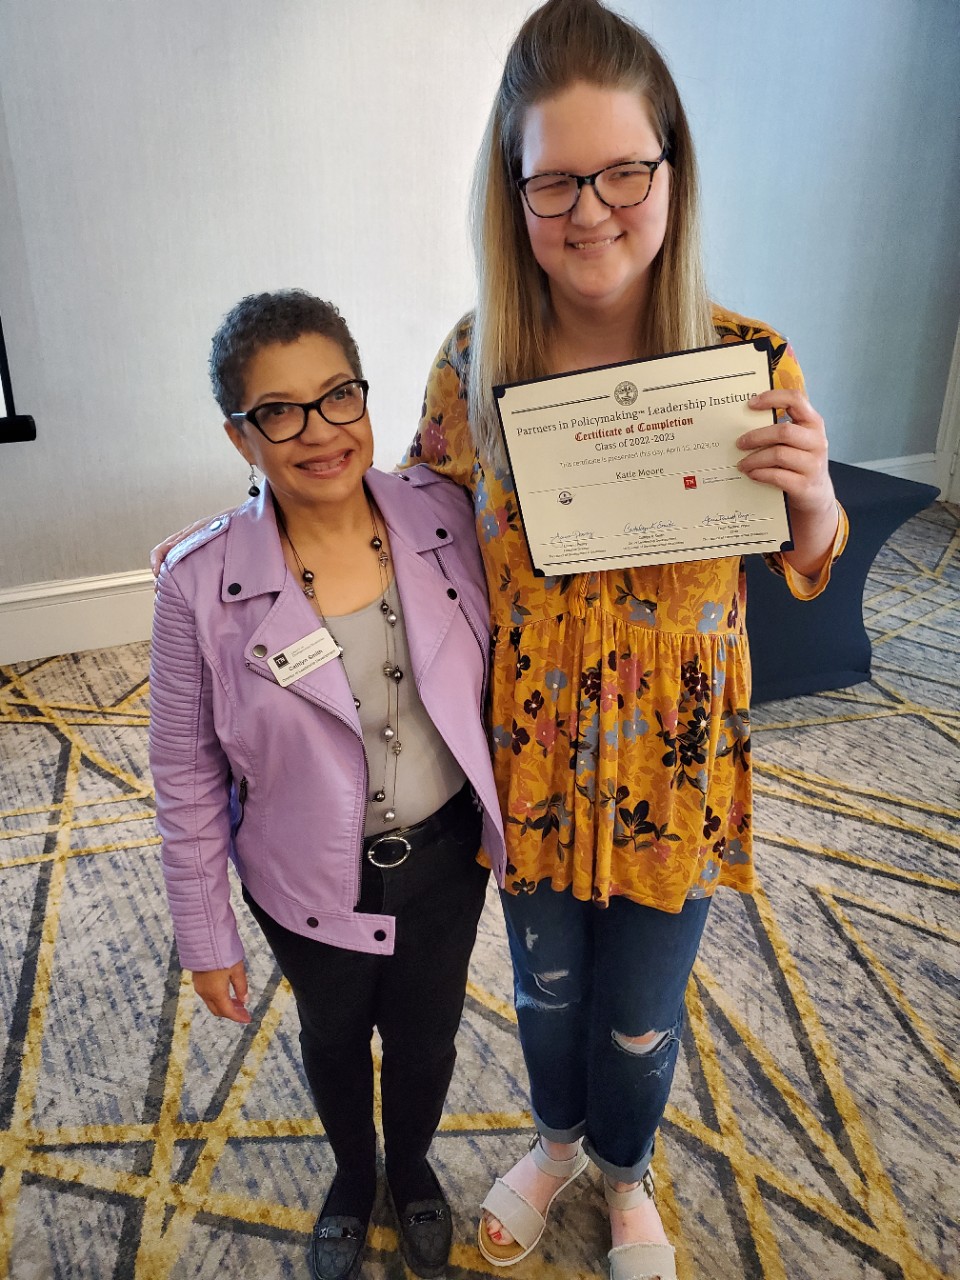 Cathlyn Smith stands with her arm around Katie, a tall, blonde young woman in glasses and a yellow floral top and jeans, smiling and holding a certificate. 